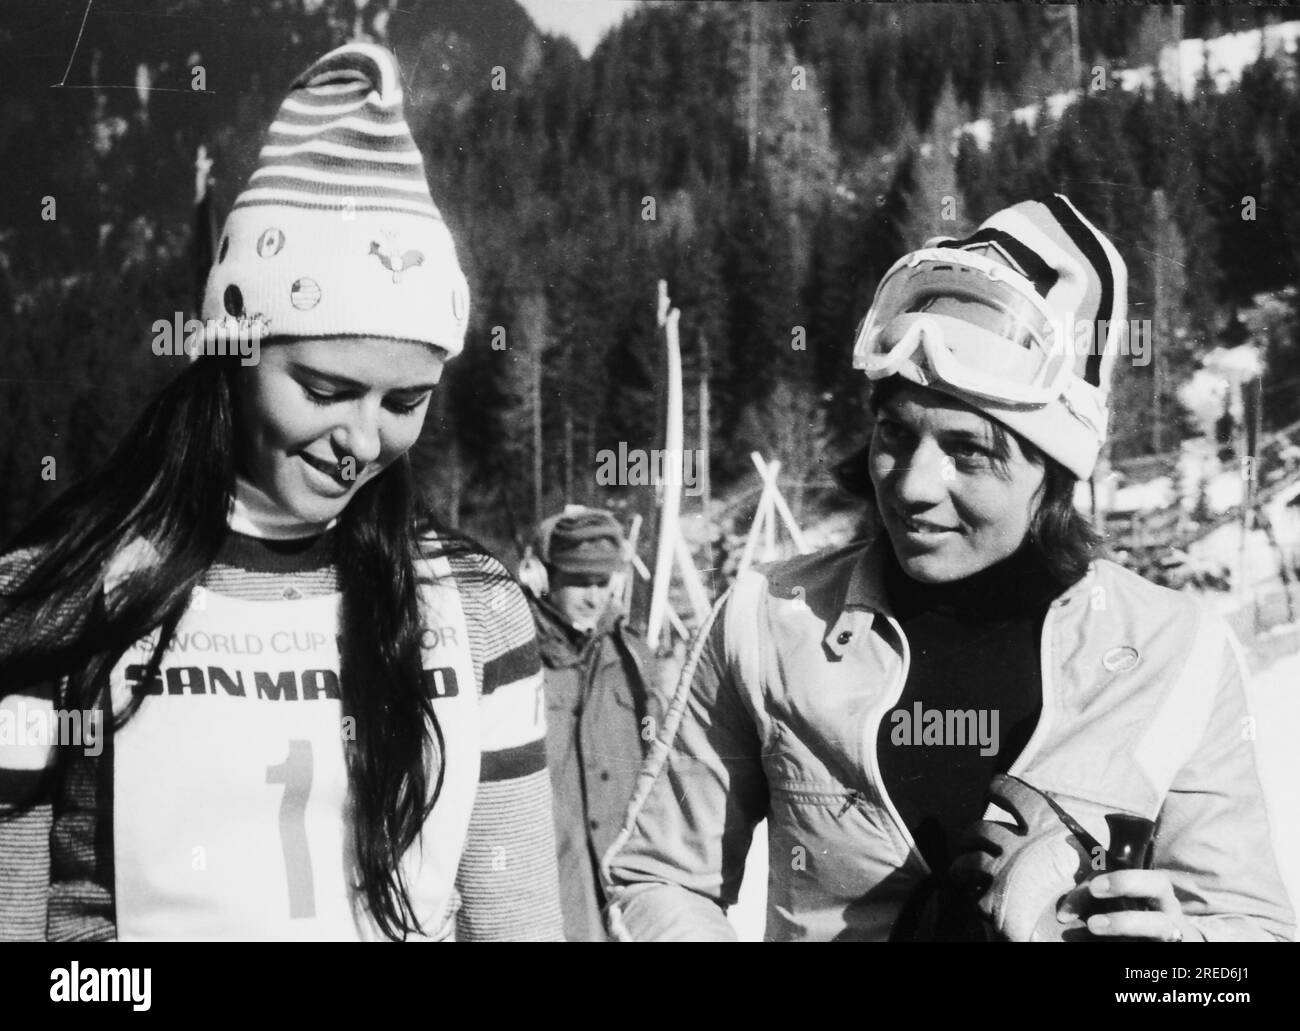 Fabienne Serrat and Rosi Mittermaier at the Ski World Cup in Bad Gastein. [automated translation] Stock Photo